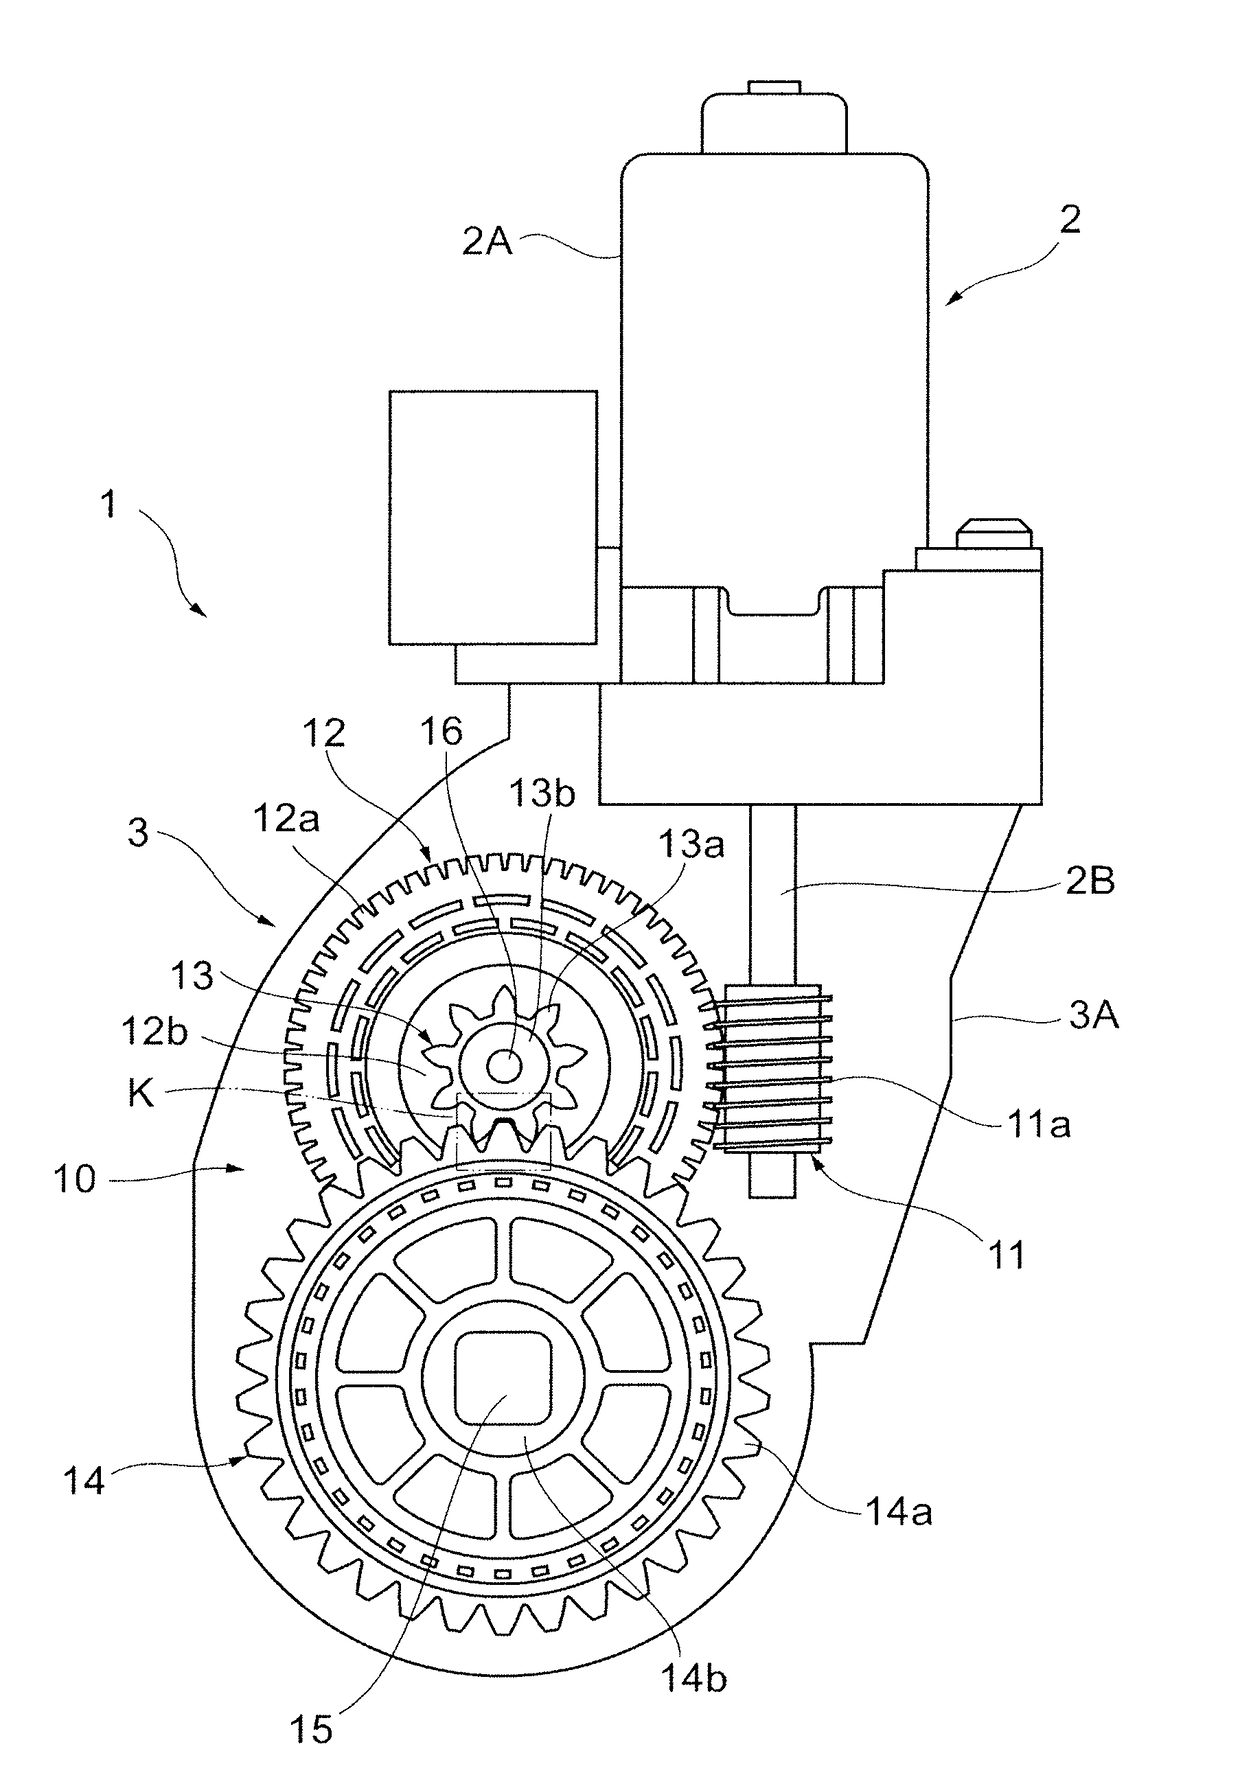 Gear unit, reducer, and reducer-equipped motor